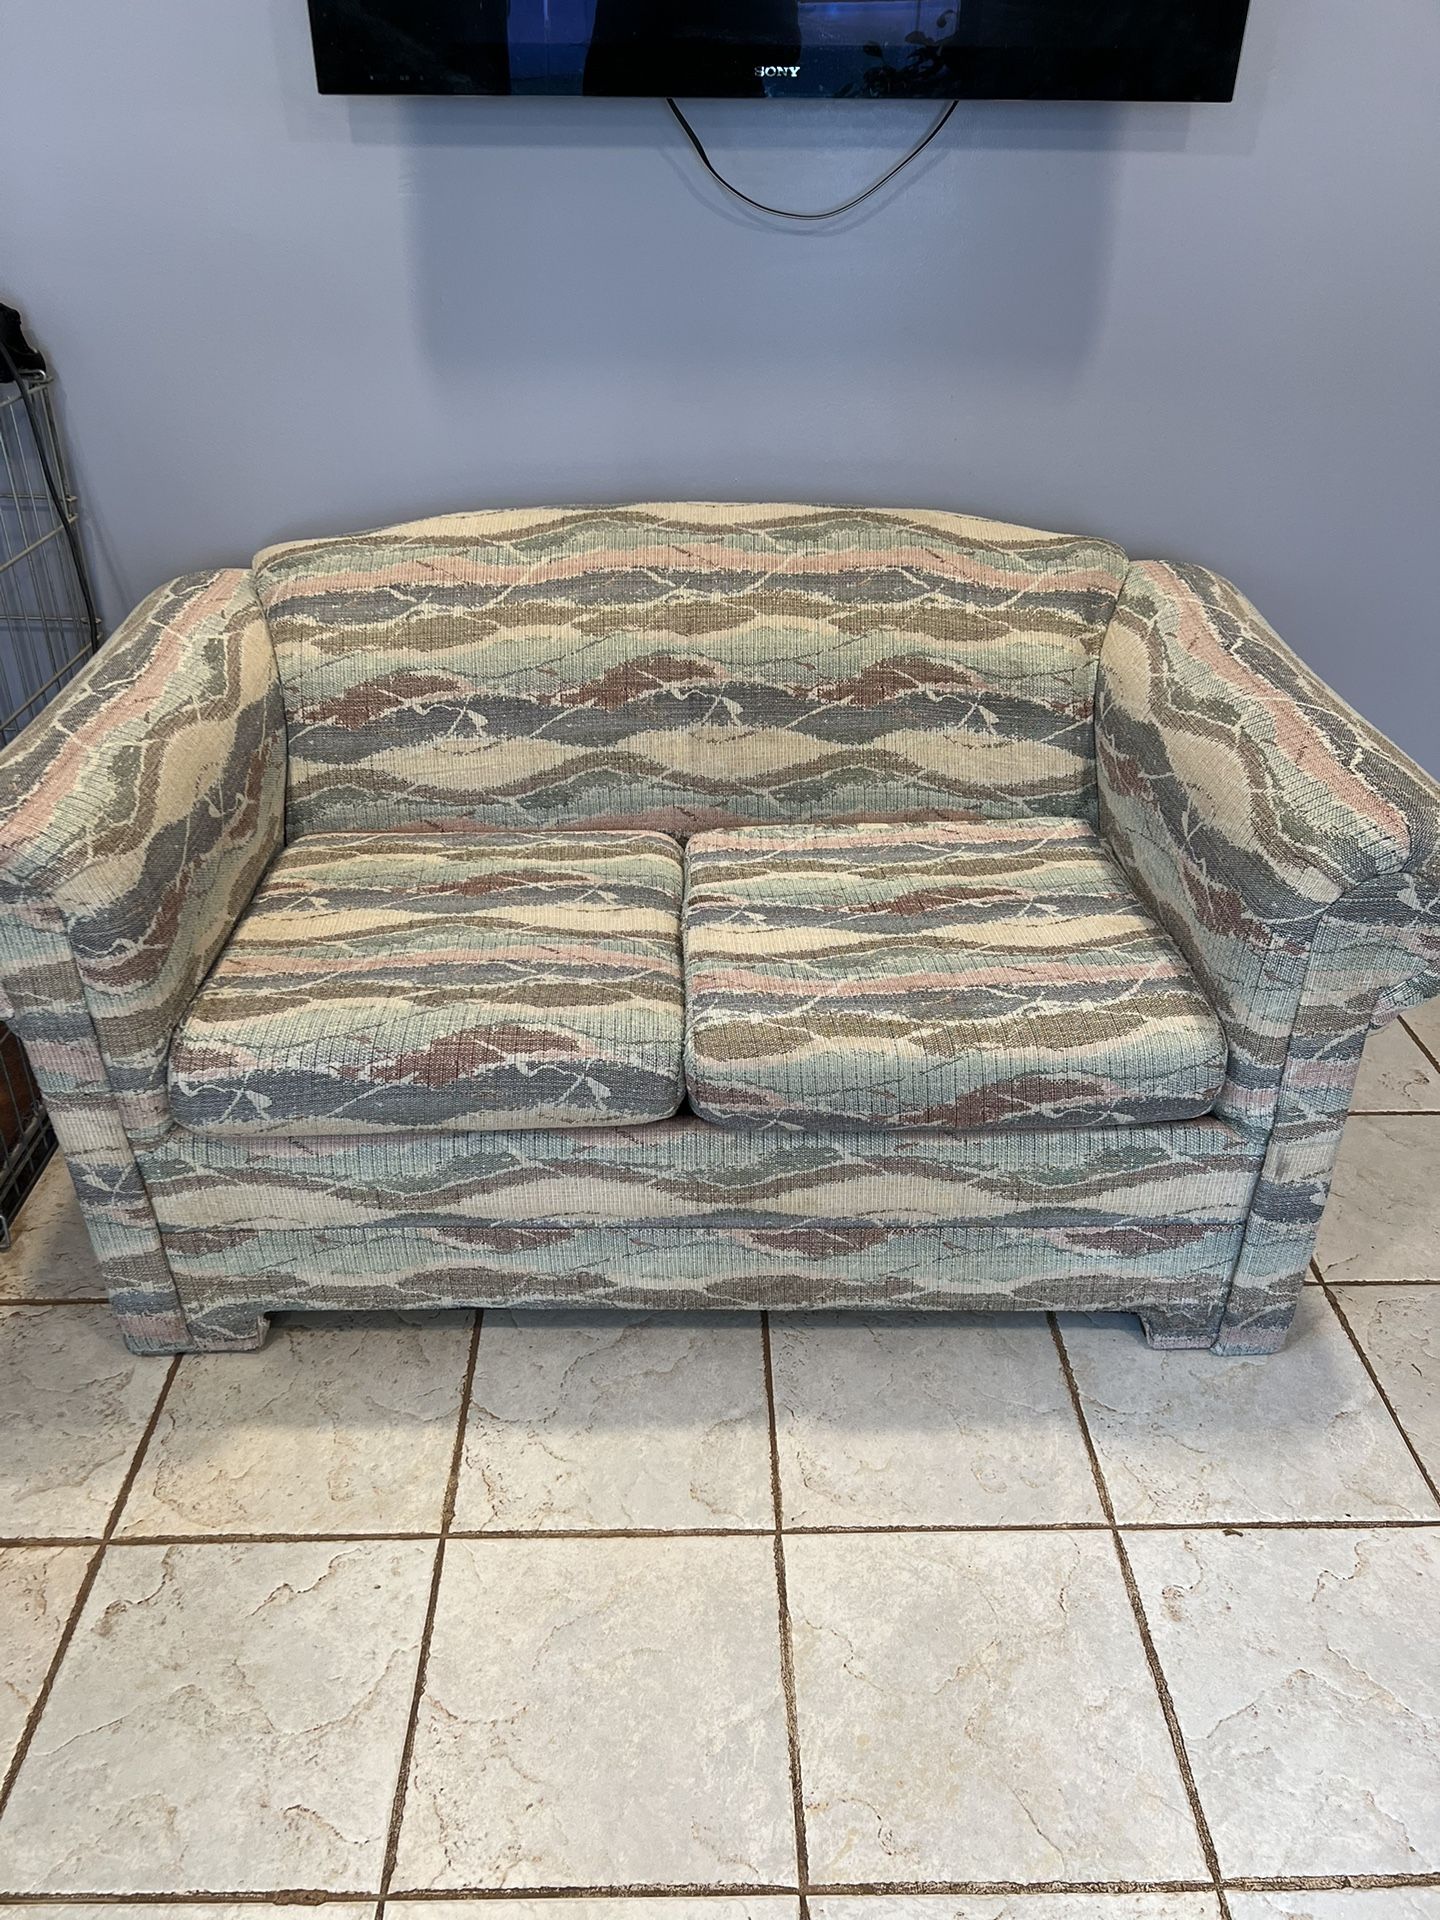 FREE Sturdy Comfy SOFA-COUCH - No Rips Or Stains